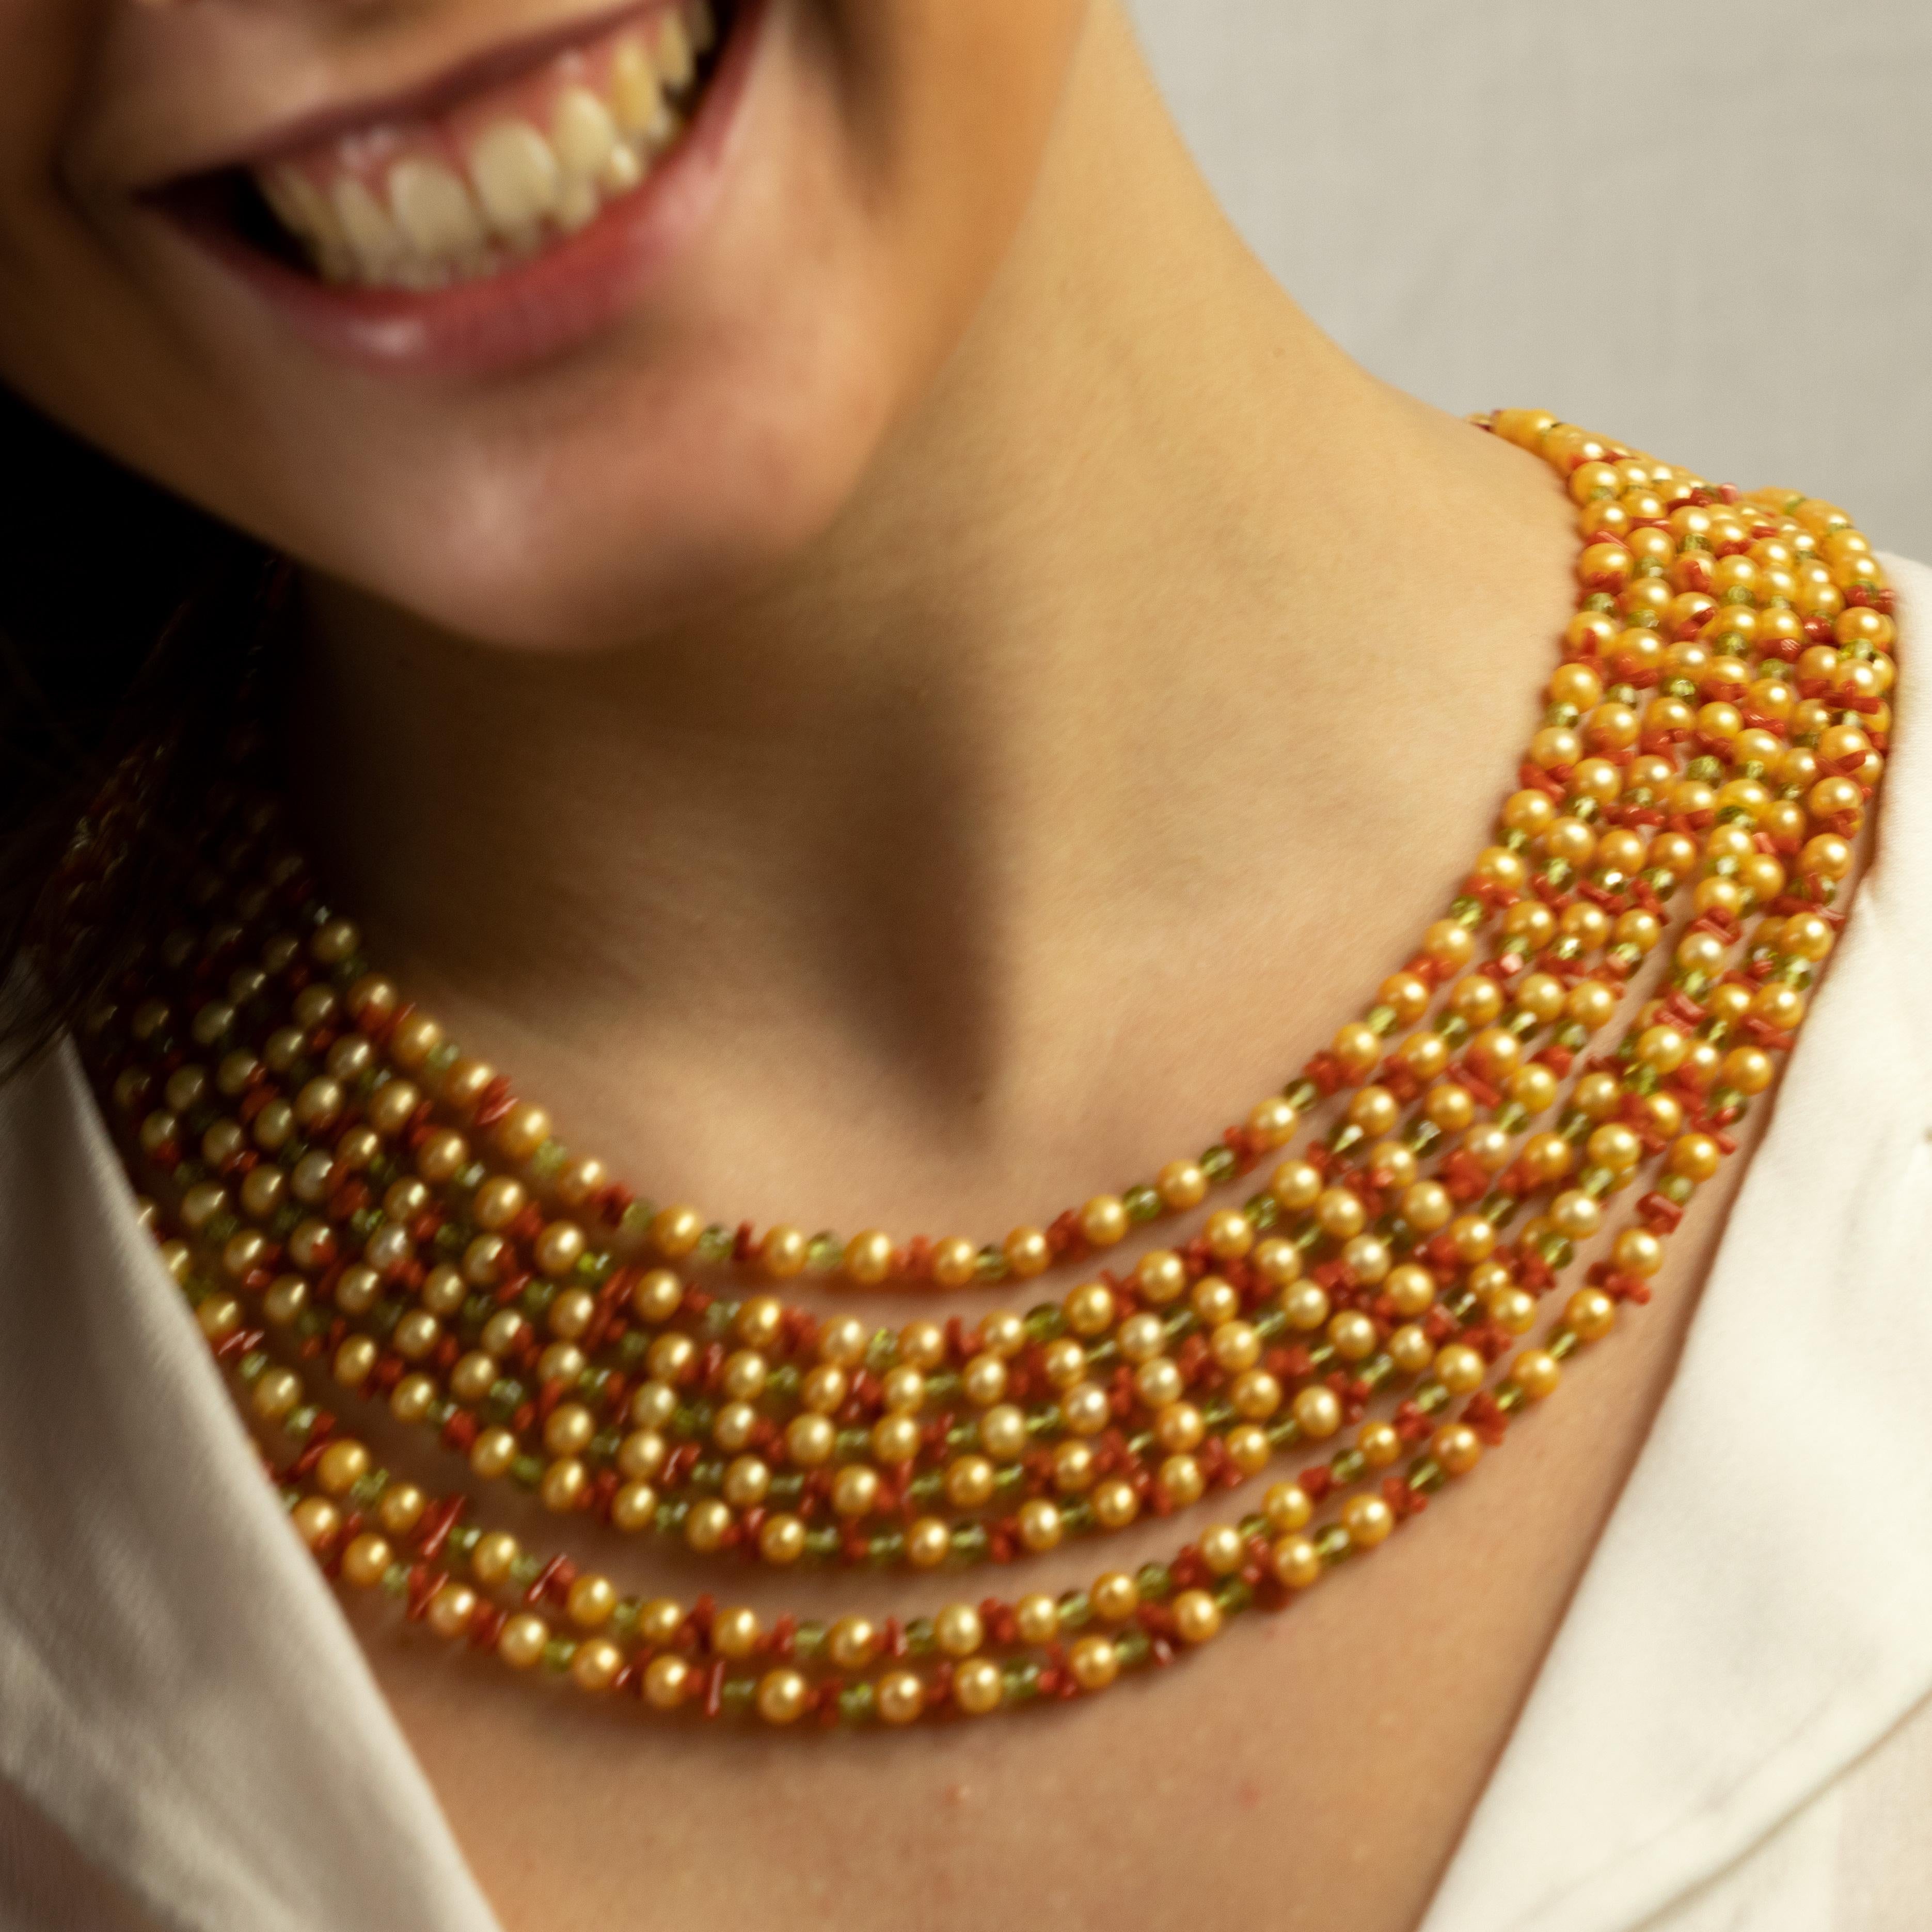 Timeless necklace wrapped in fresh water pearls, peridot and red coral that created a mix of luxury, intense color, sobriety and class.

Pearls are believed to attract wealth and luck as well as offer protection. This stunning and outstanding Iconic